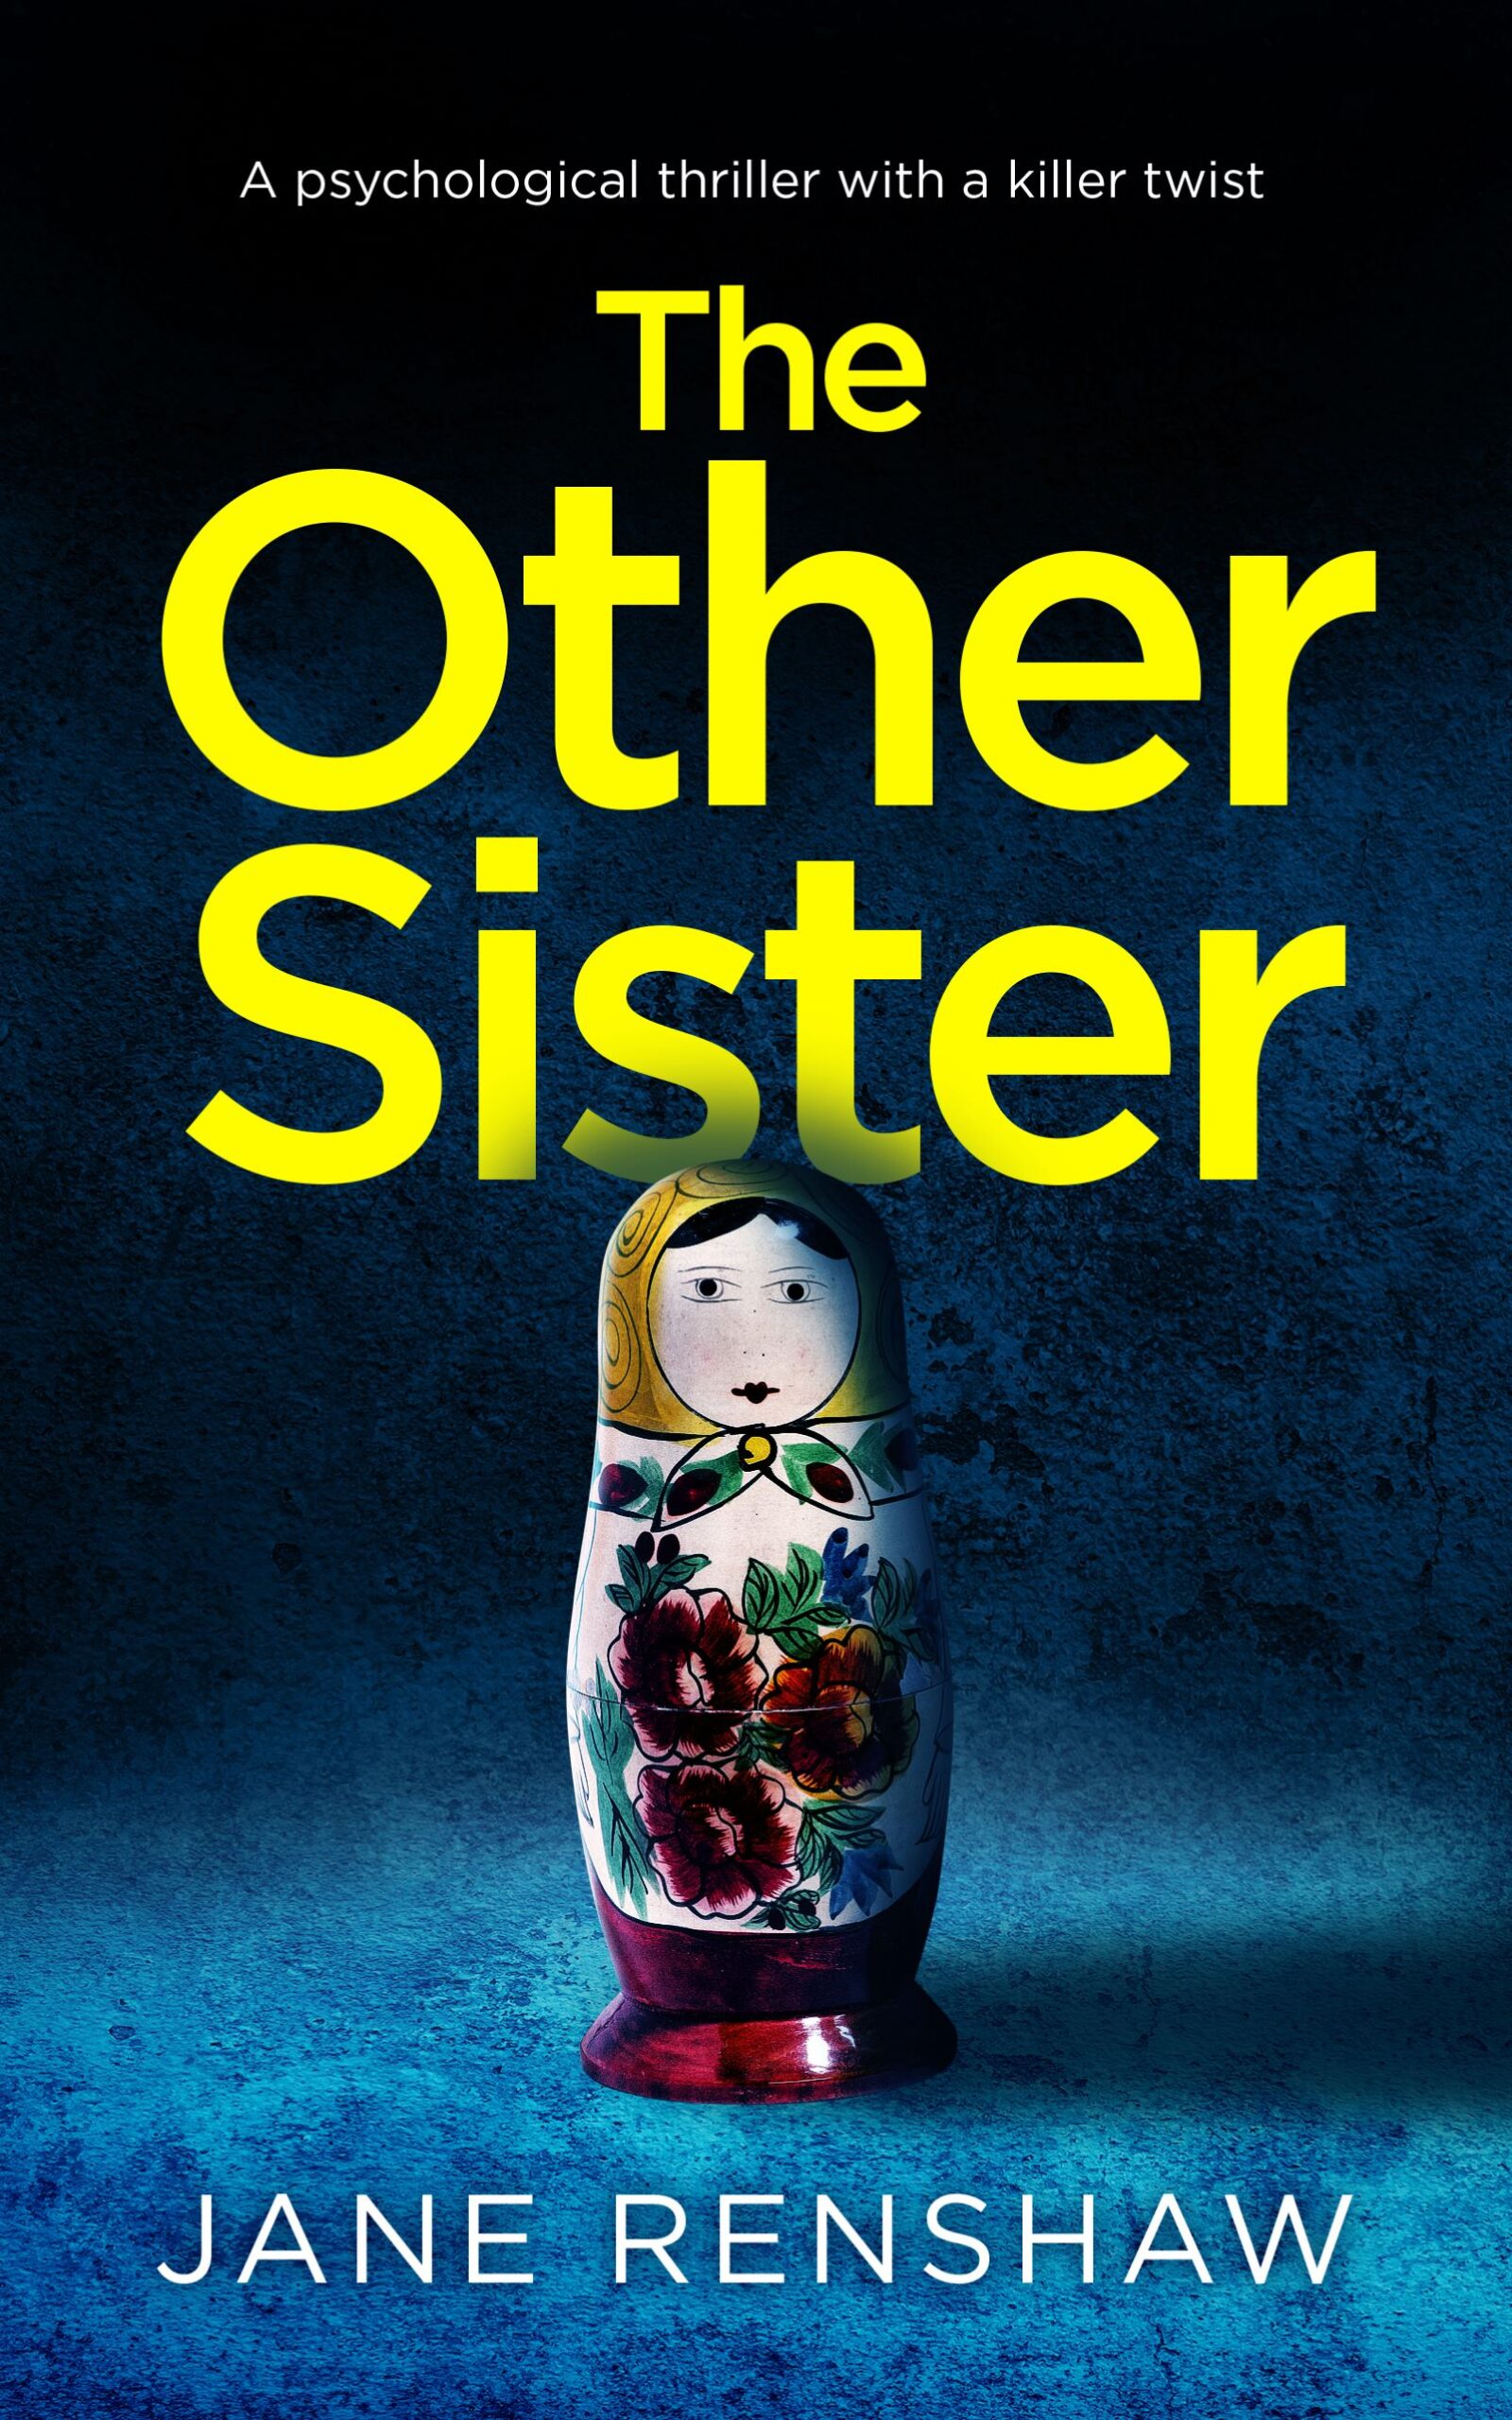 JANE RENSHAW’S NEW RELEASE – THE OTHER SISTER